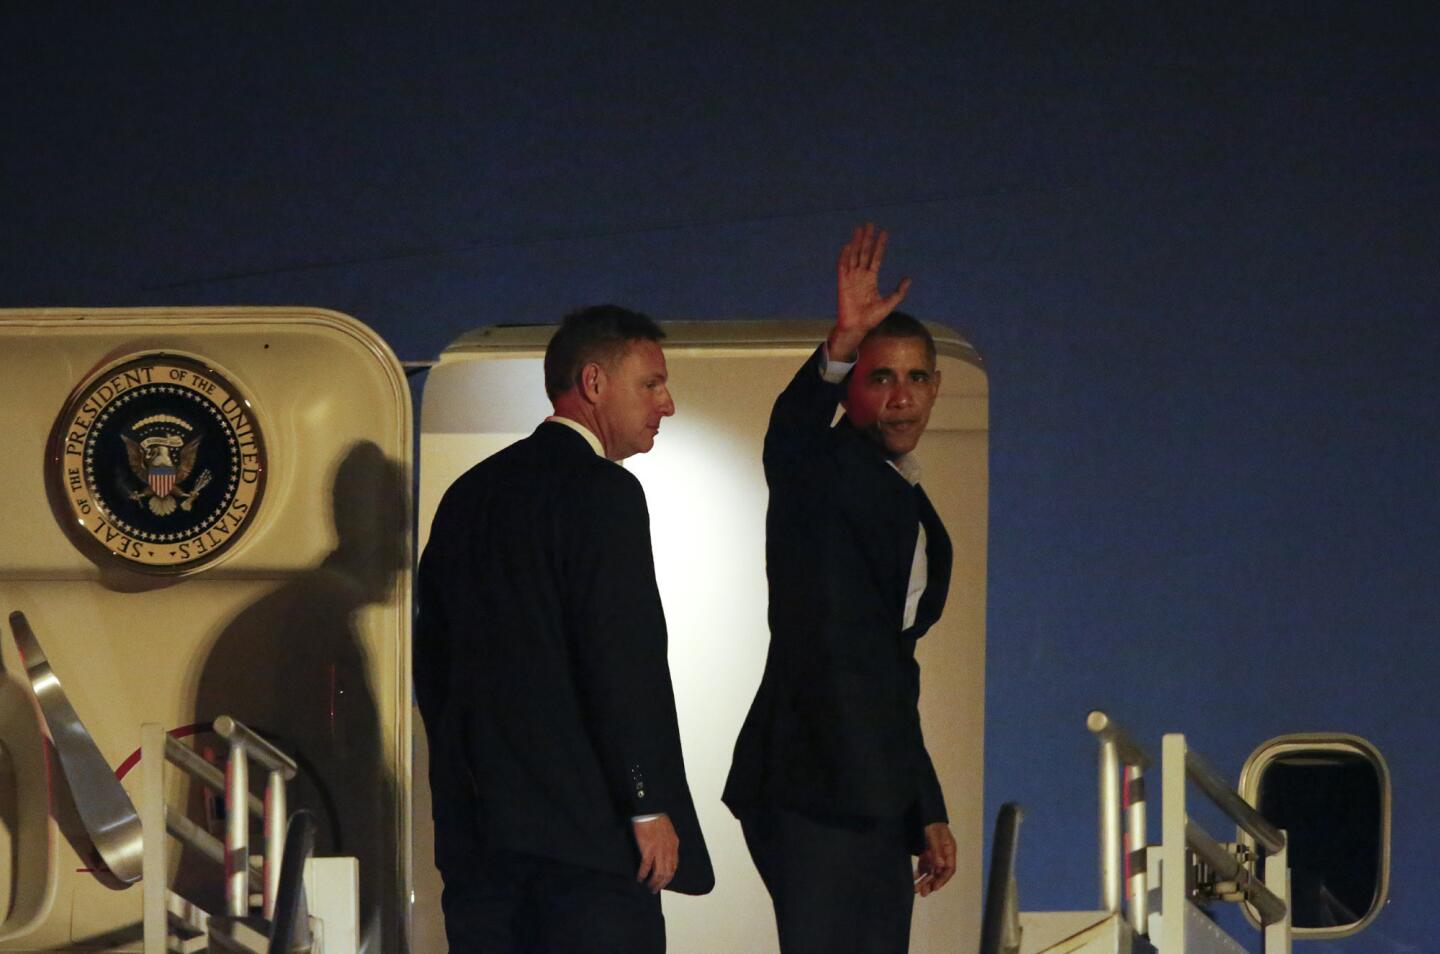 President Obama waves as he boards Air Force One at LAX to depart Los Angeles on Saturday night.